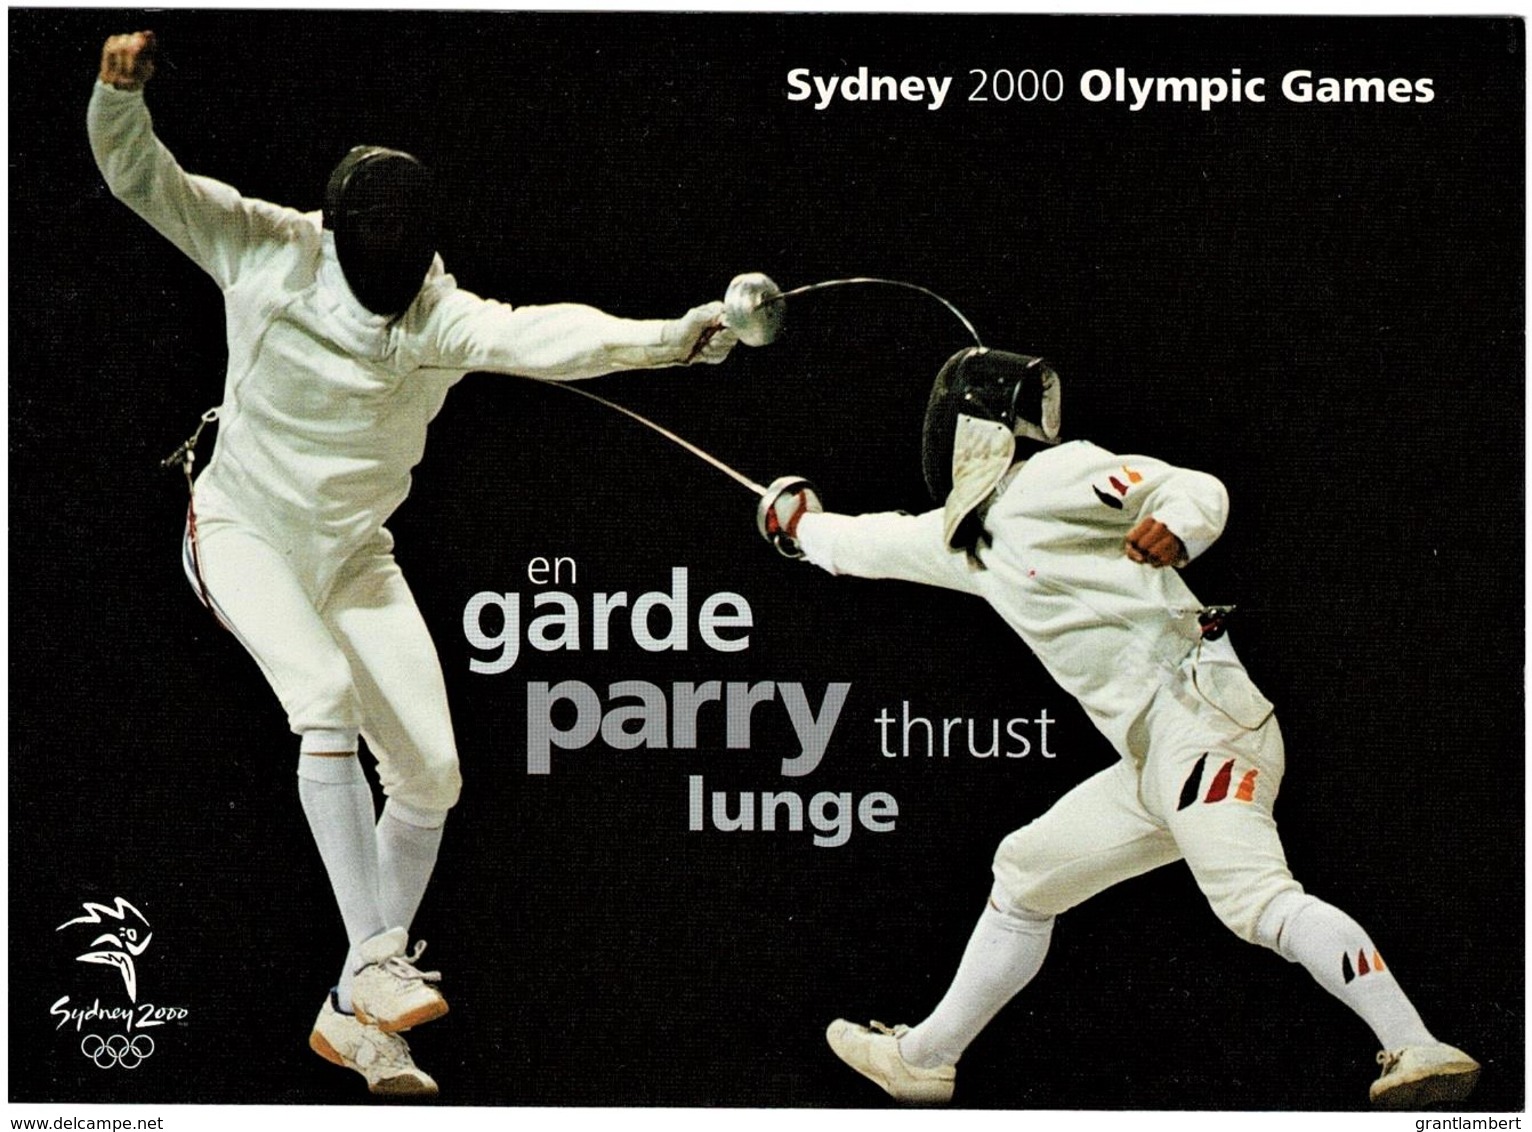 Sydney 2000 Olympic Games - Fencing, Parry, Thrust, Lunge - Unused - Olympic Games